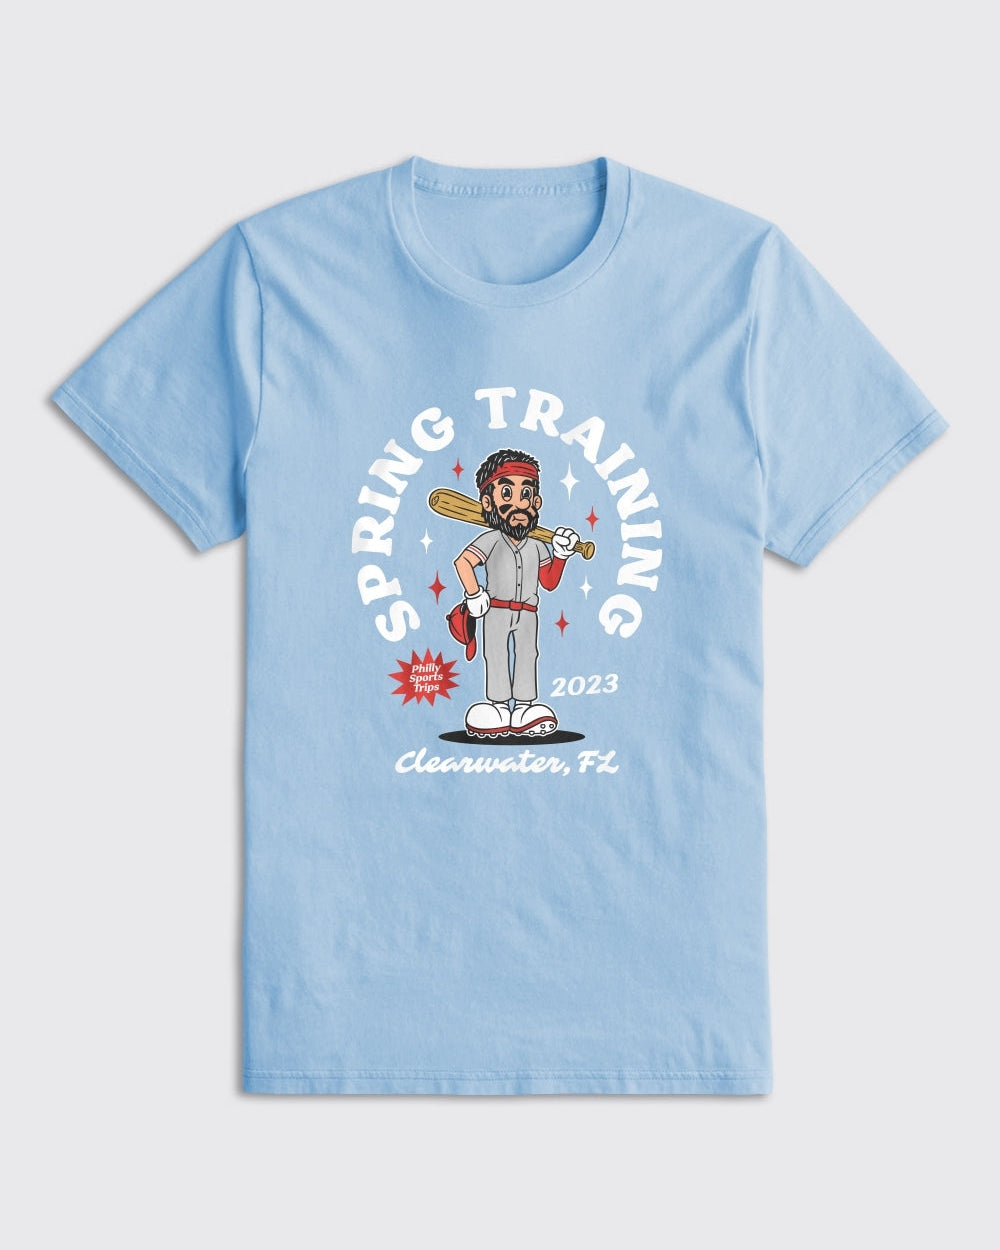 PST Phillies Spring Training 2023 Shirt - Philly Sports Trips - Philly Sports Shirts